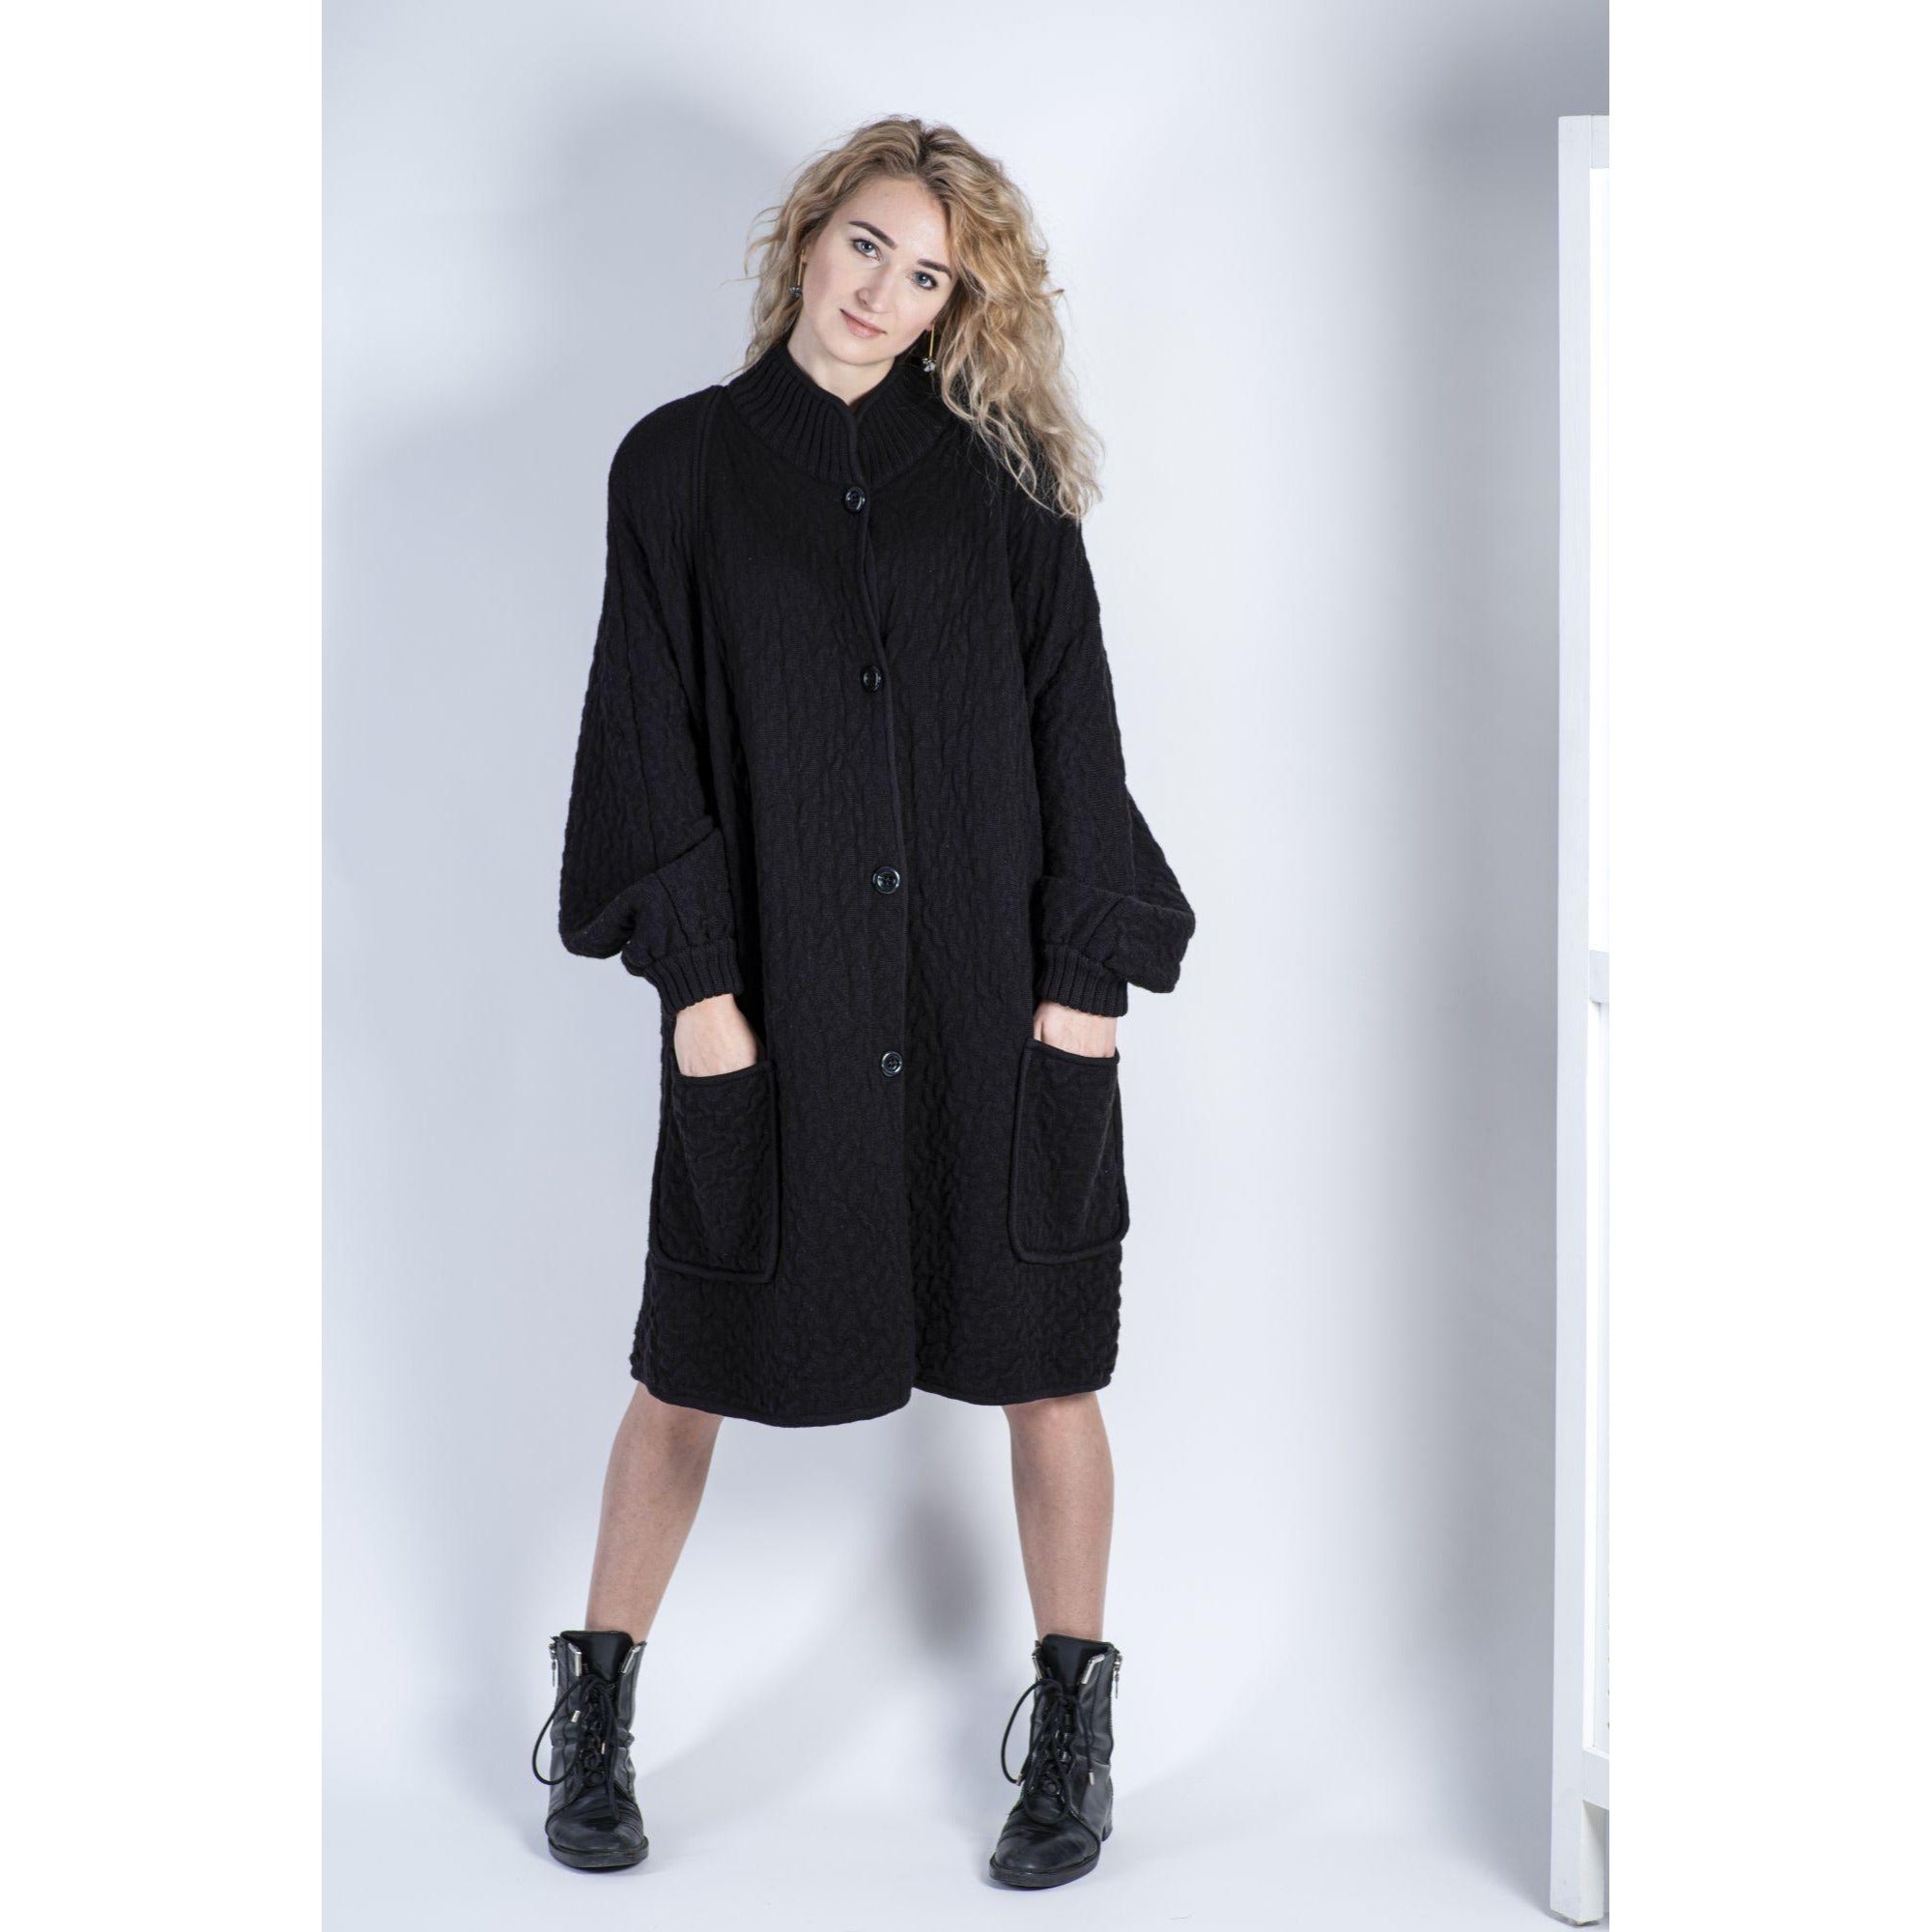 Valentino Oversized Chunky Wool Coat / Cardigan with Batwing Sleeves, XXL